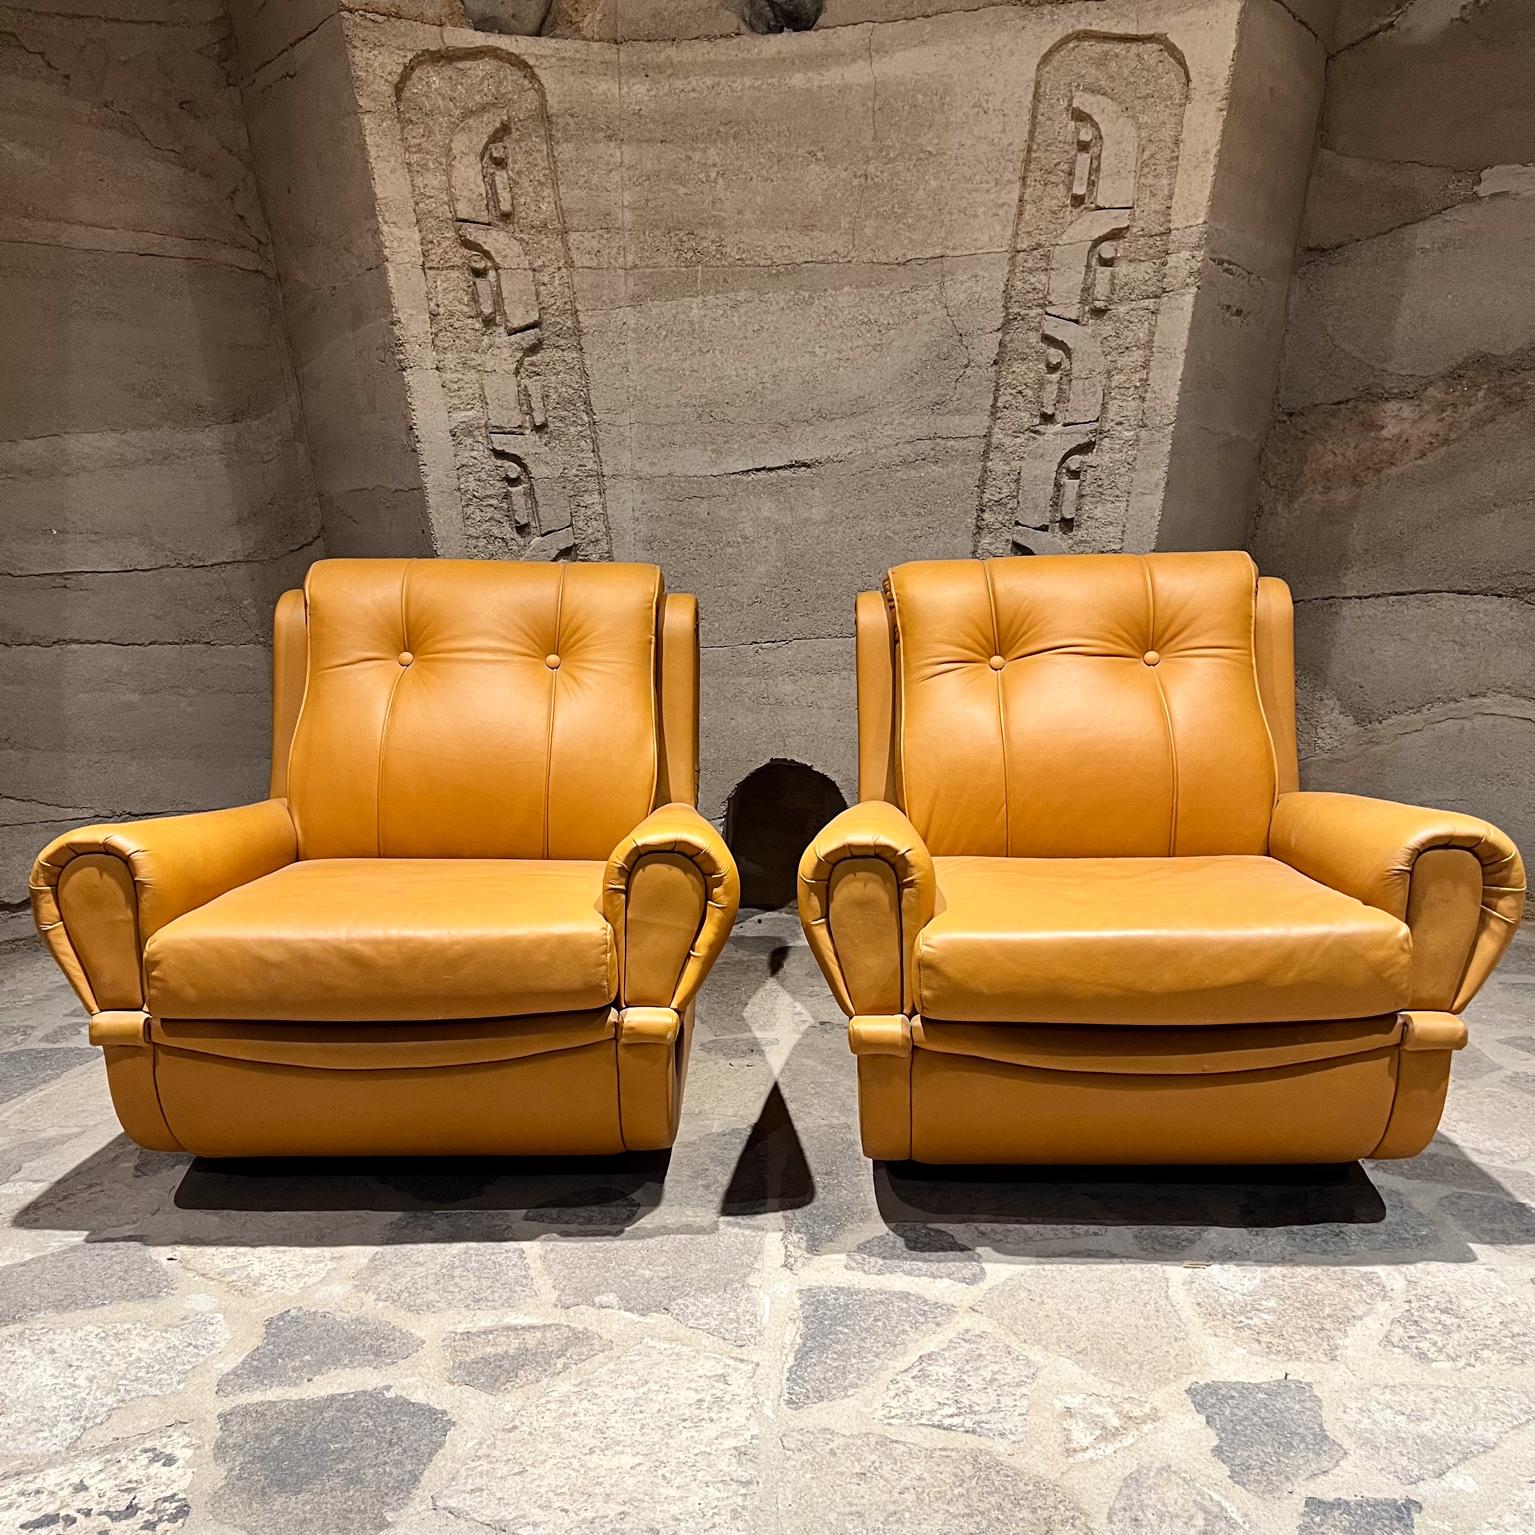 1960s Giuseppe Munari for Poltrona Italian Leather Lounge Chairs  In Good Condition For Sale In Chula Vista, CA